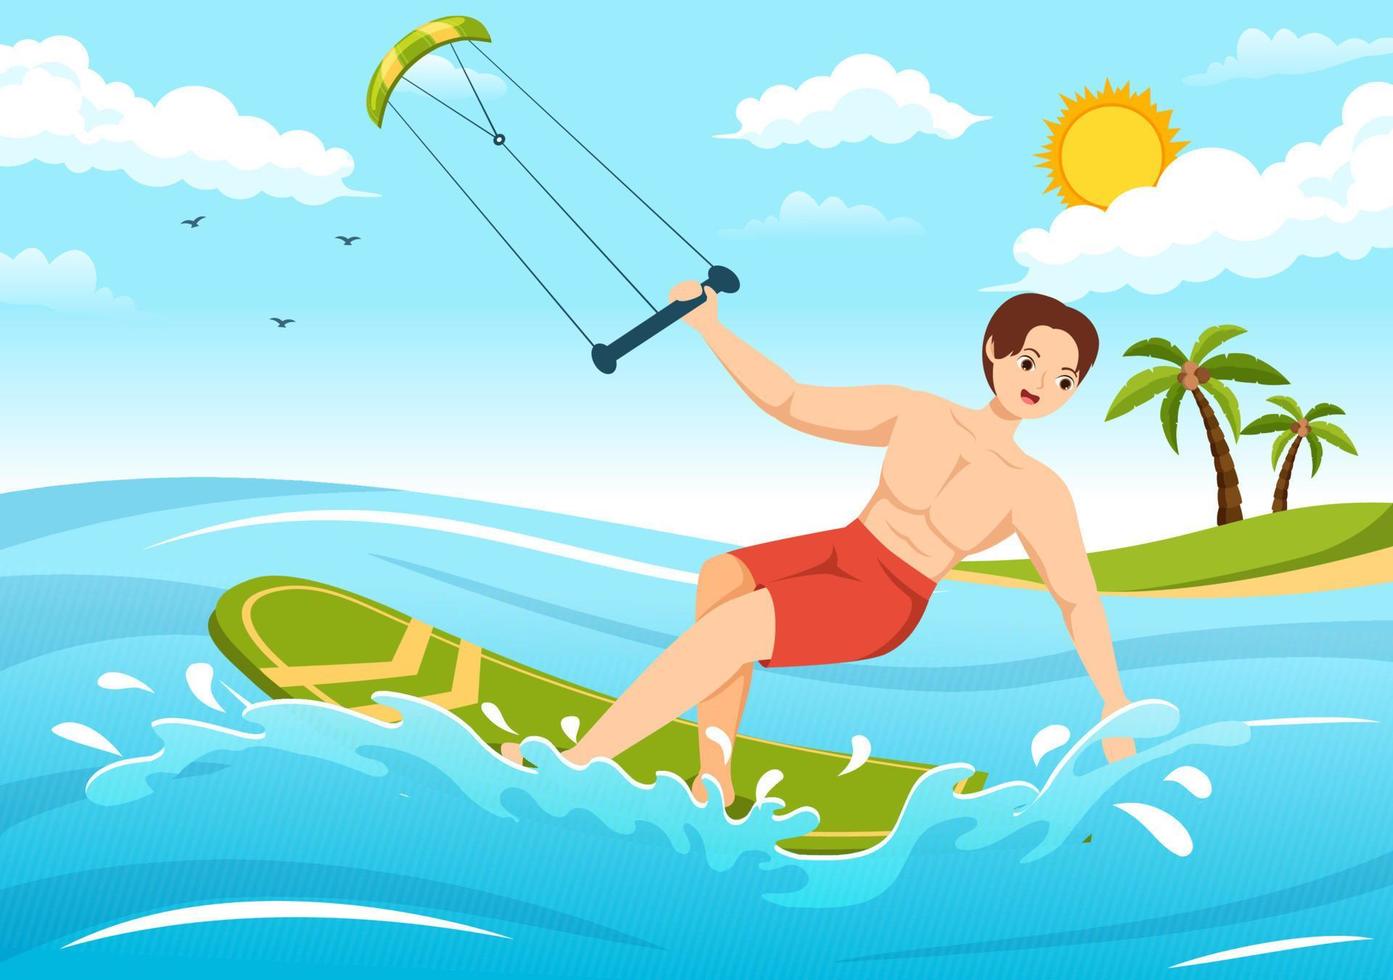 Kitesurfing Illustration with Kite Surfer Standing on Kiteboard in the Summer Sea in Extreme Water Sports Flat Cartoon Hand Drawn Template vector